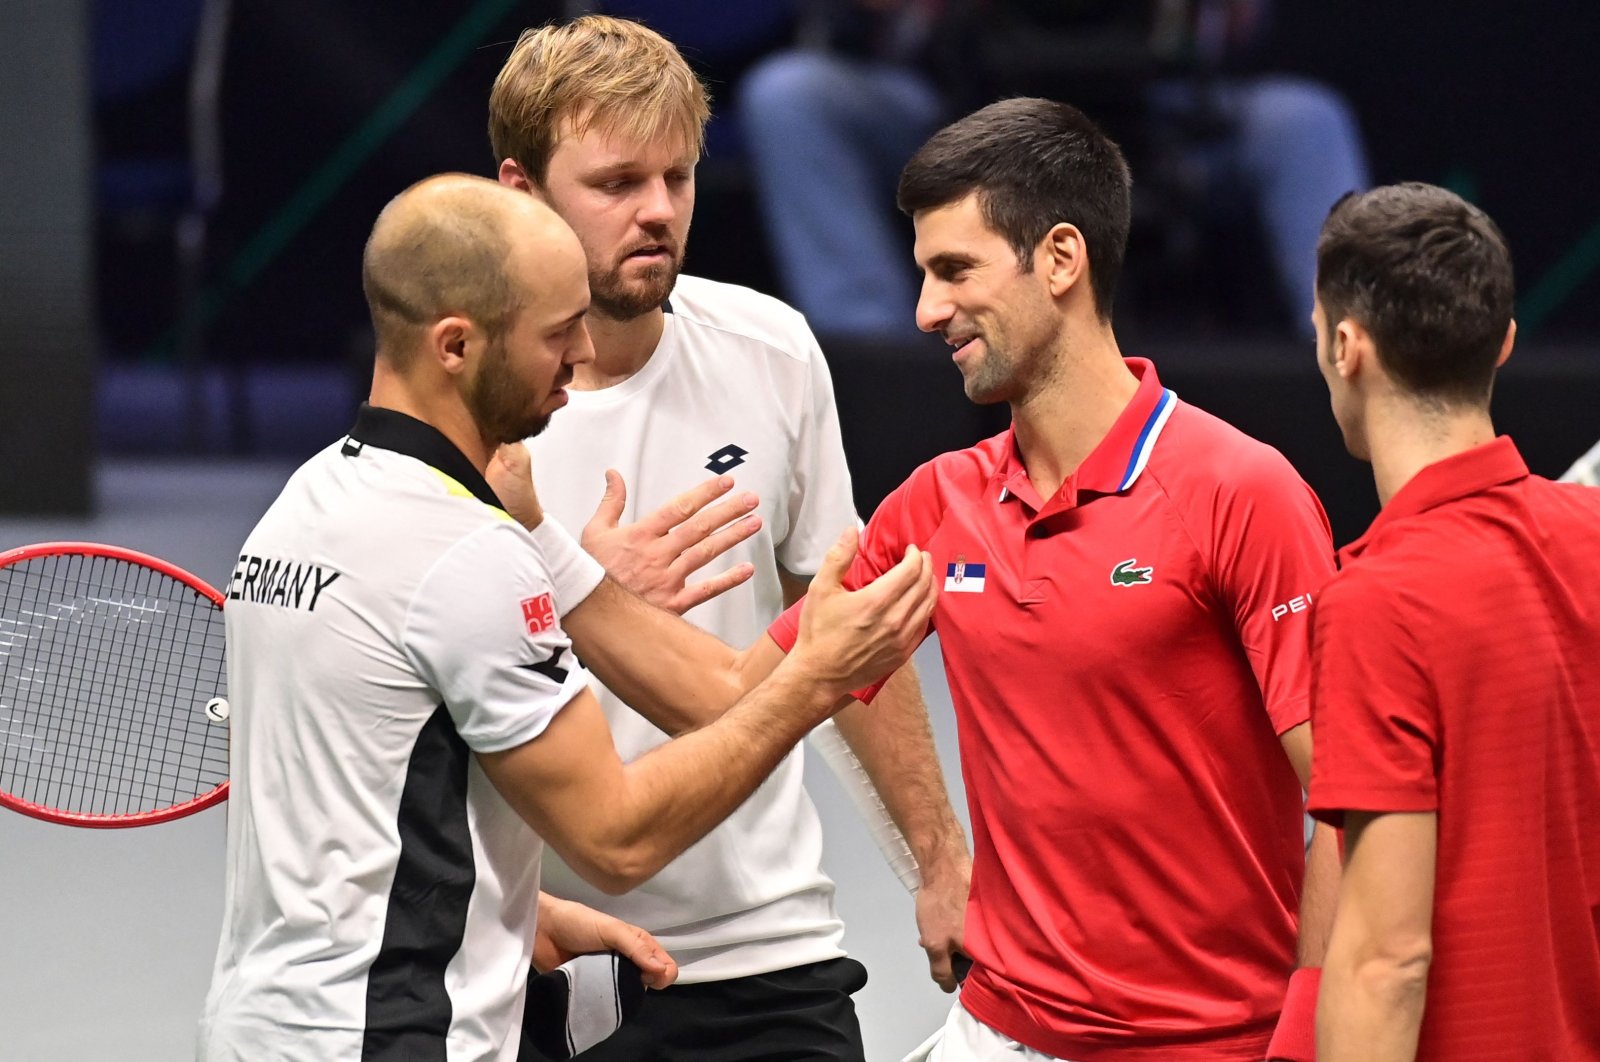 Germany&#039;s Kevin Krawietz (2nd L) and Tim Puetz (L) are congratulated by Serbia&#039;s Novak Djokovic (2nd R) and Nikola Cacic (R) at the end of the men&#039;s doubles group stage Davis Cup match, Innsbruck, Austria, Nov. 27, 2021. (AFP Photo)